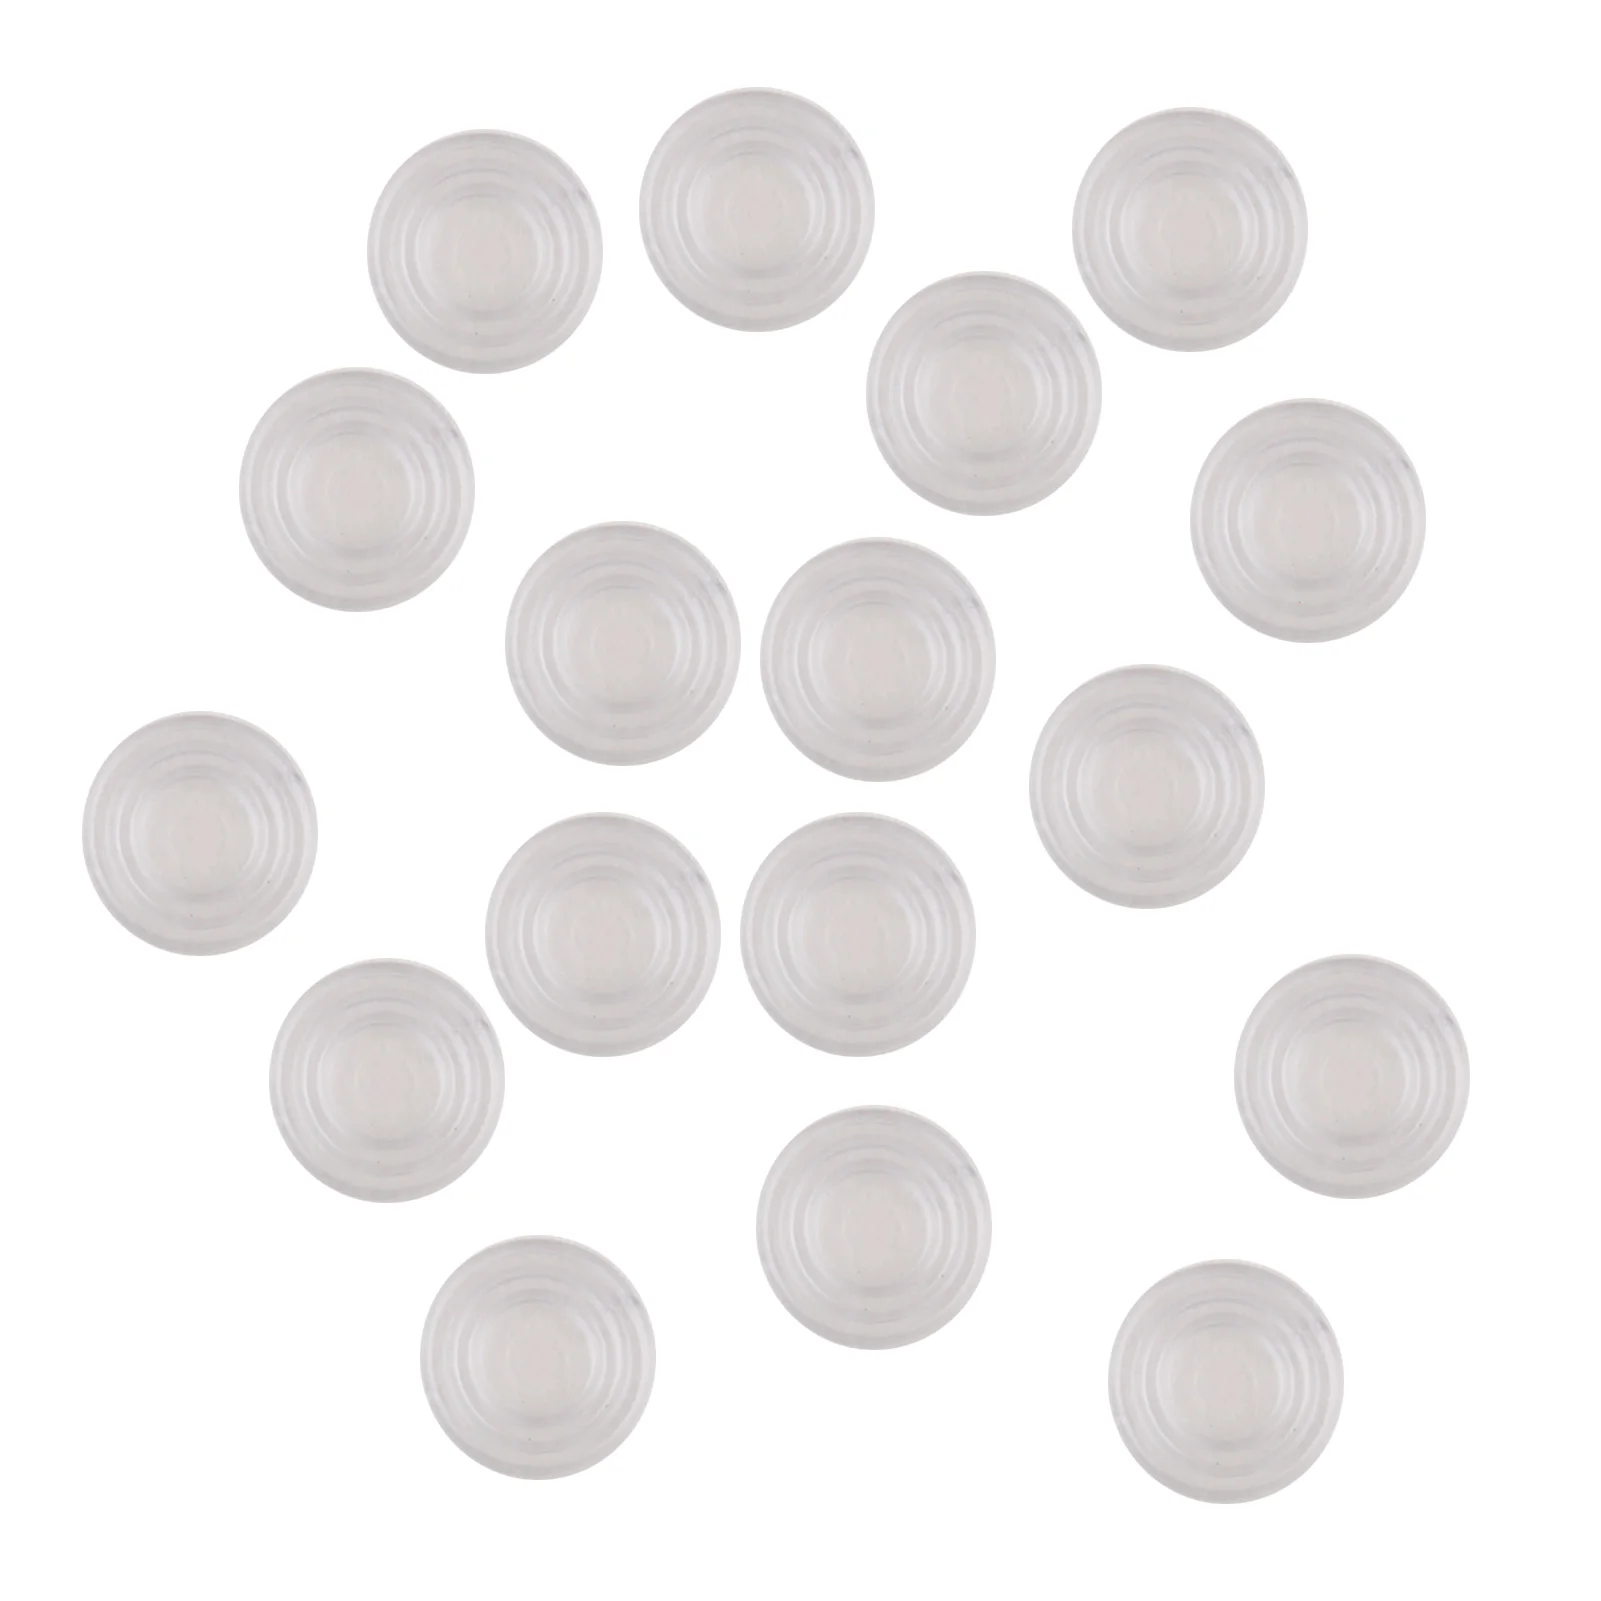 50pcs Small Clear Glass Table Top Bumpers Threaded Non Sticky Soft Anti Slip 